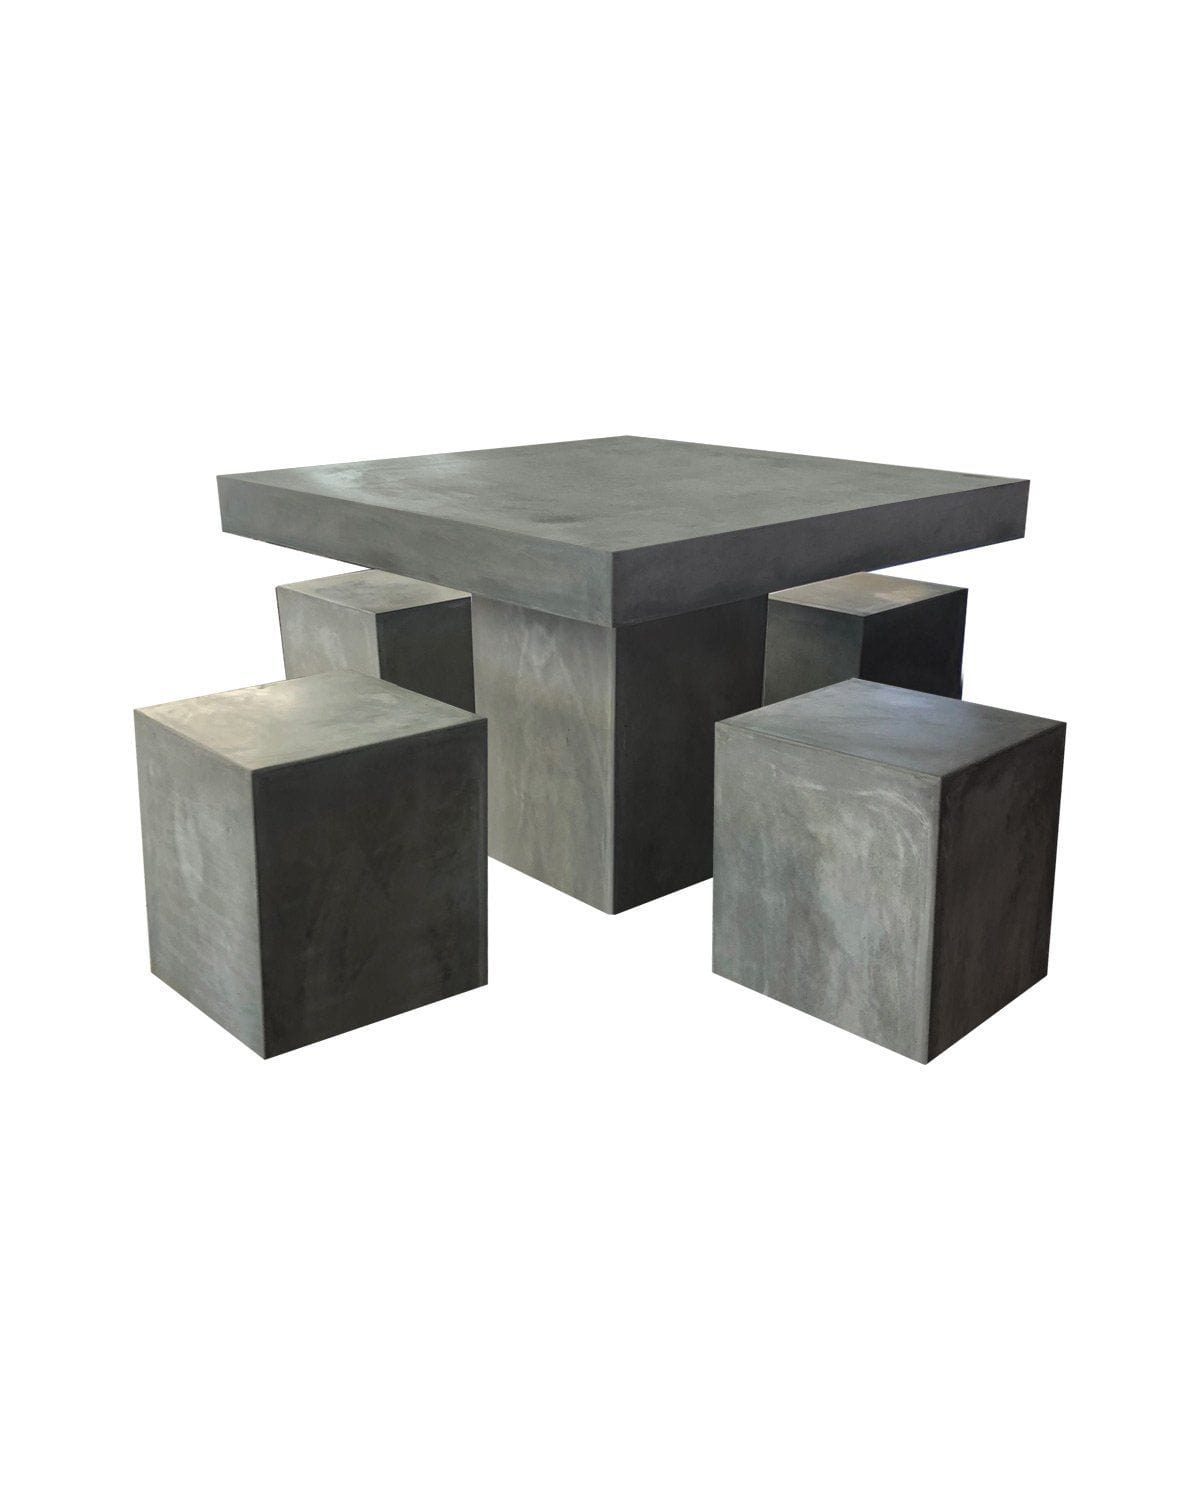 GFRC Gist Piazza: Individual Pieces - Concrete Table, Bench & Stool Gist